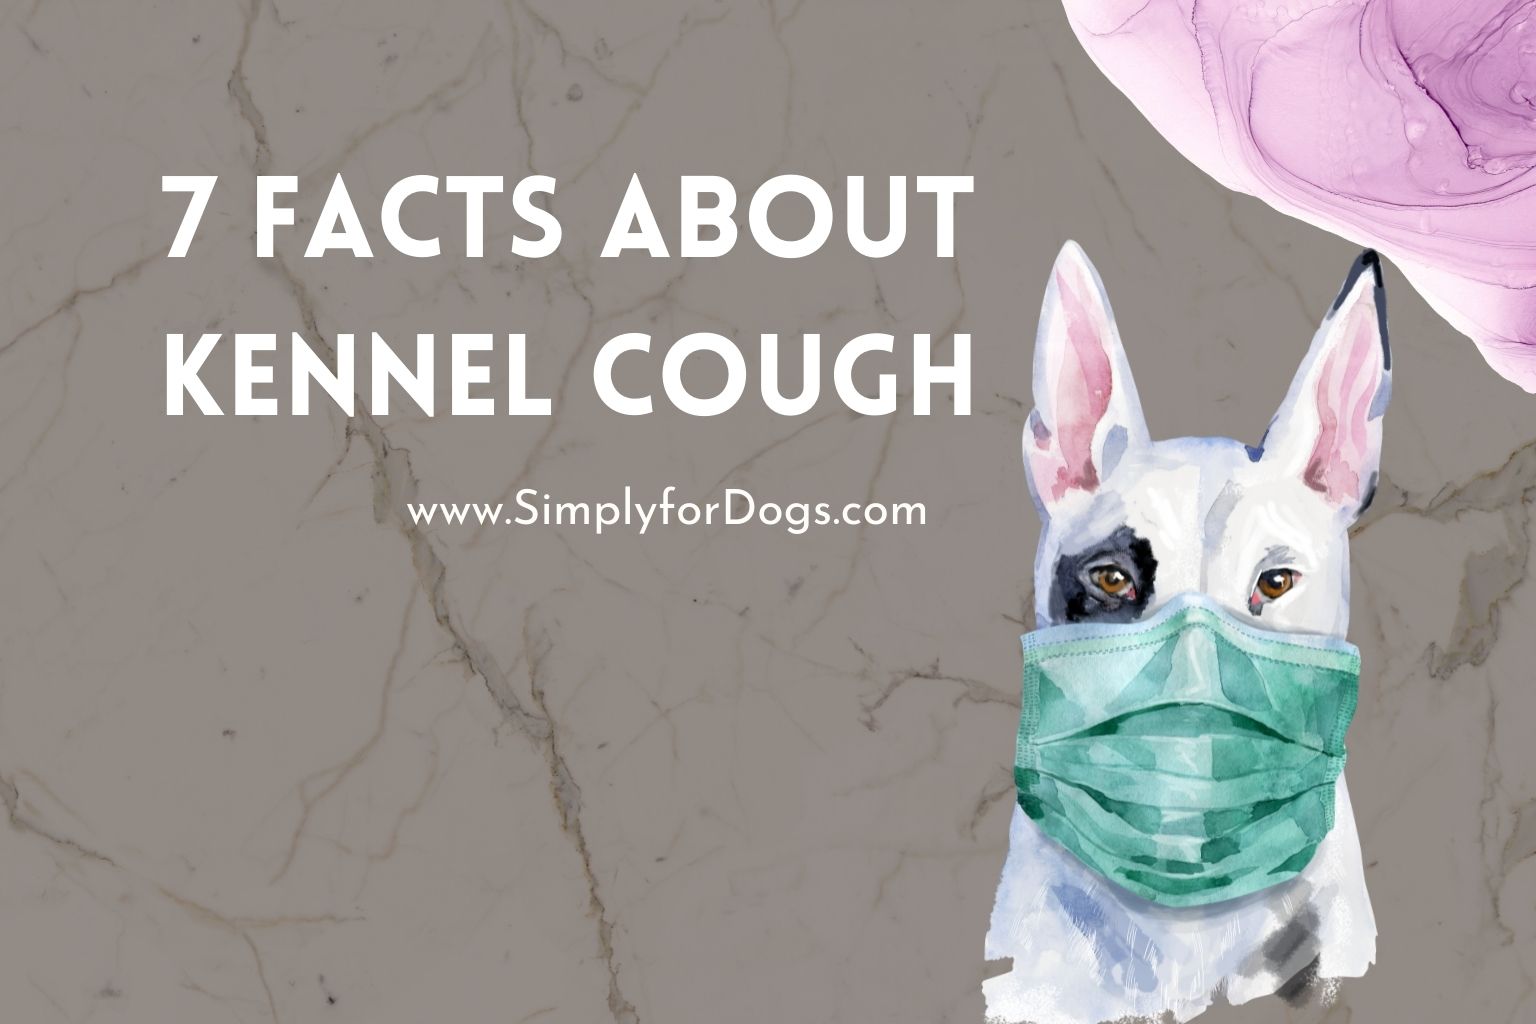 7 Facts About Kennel Cough